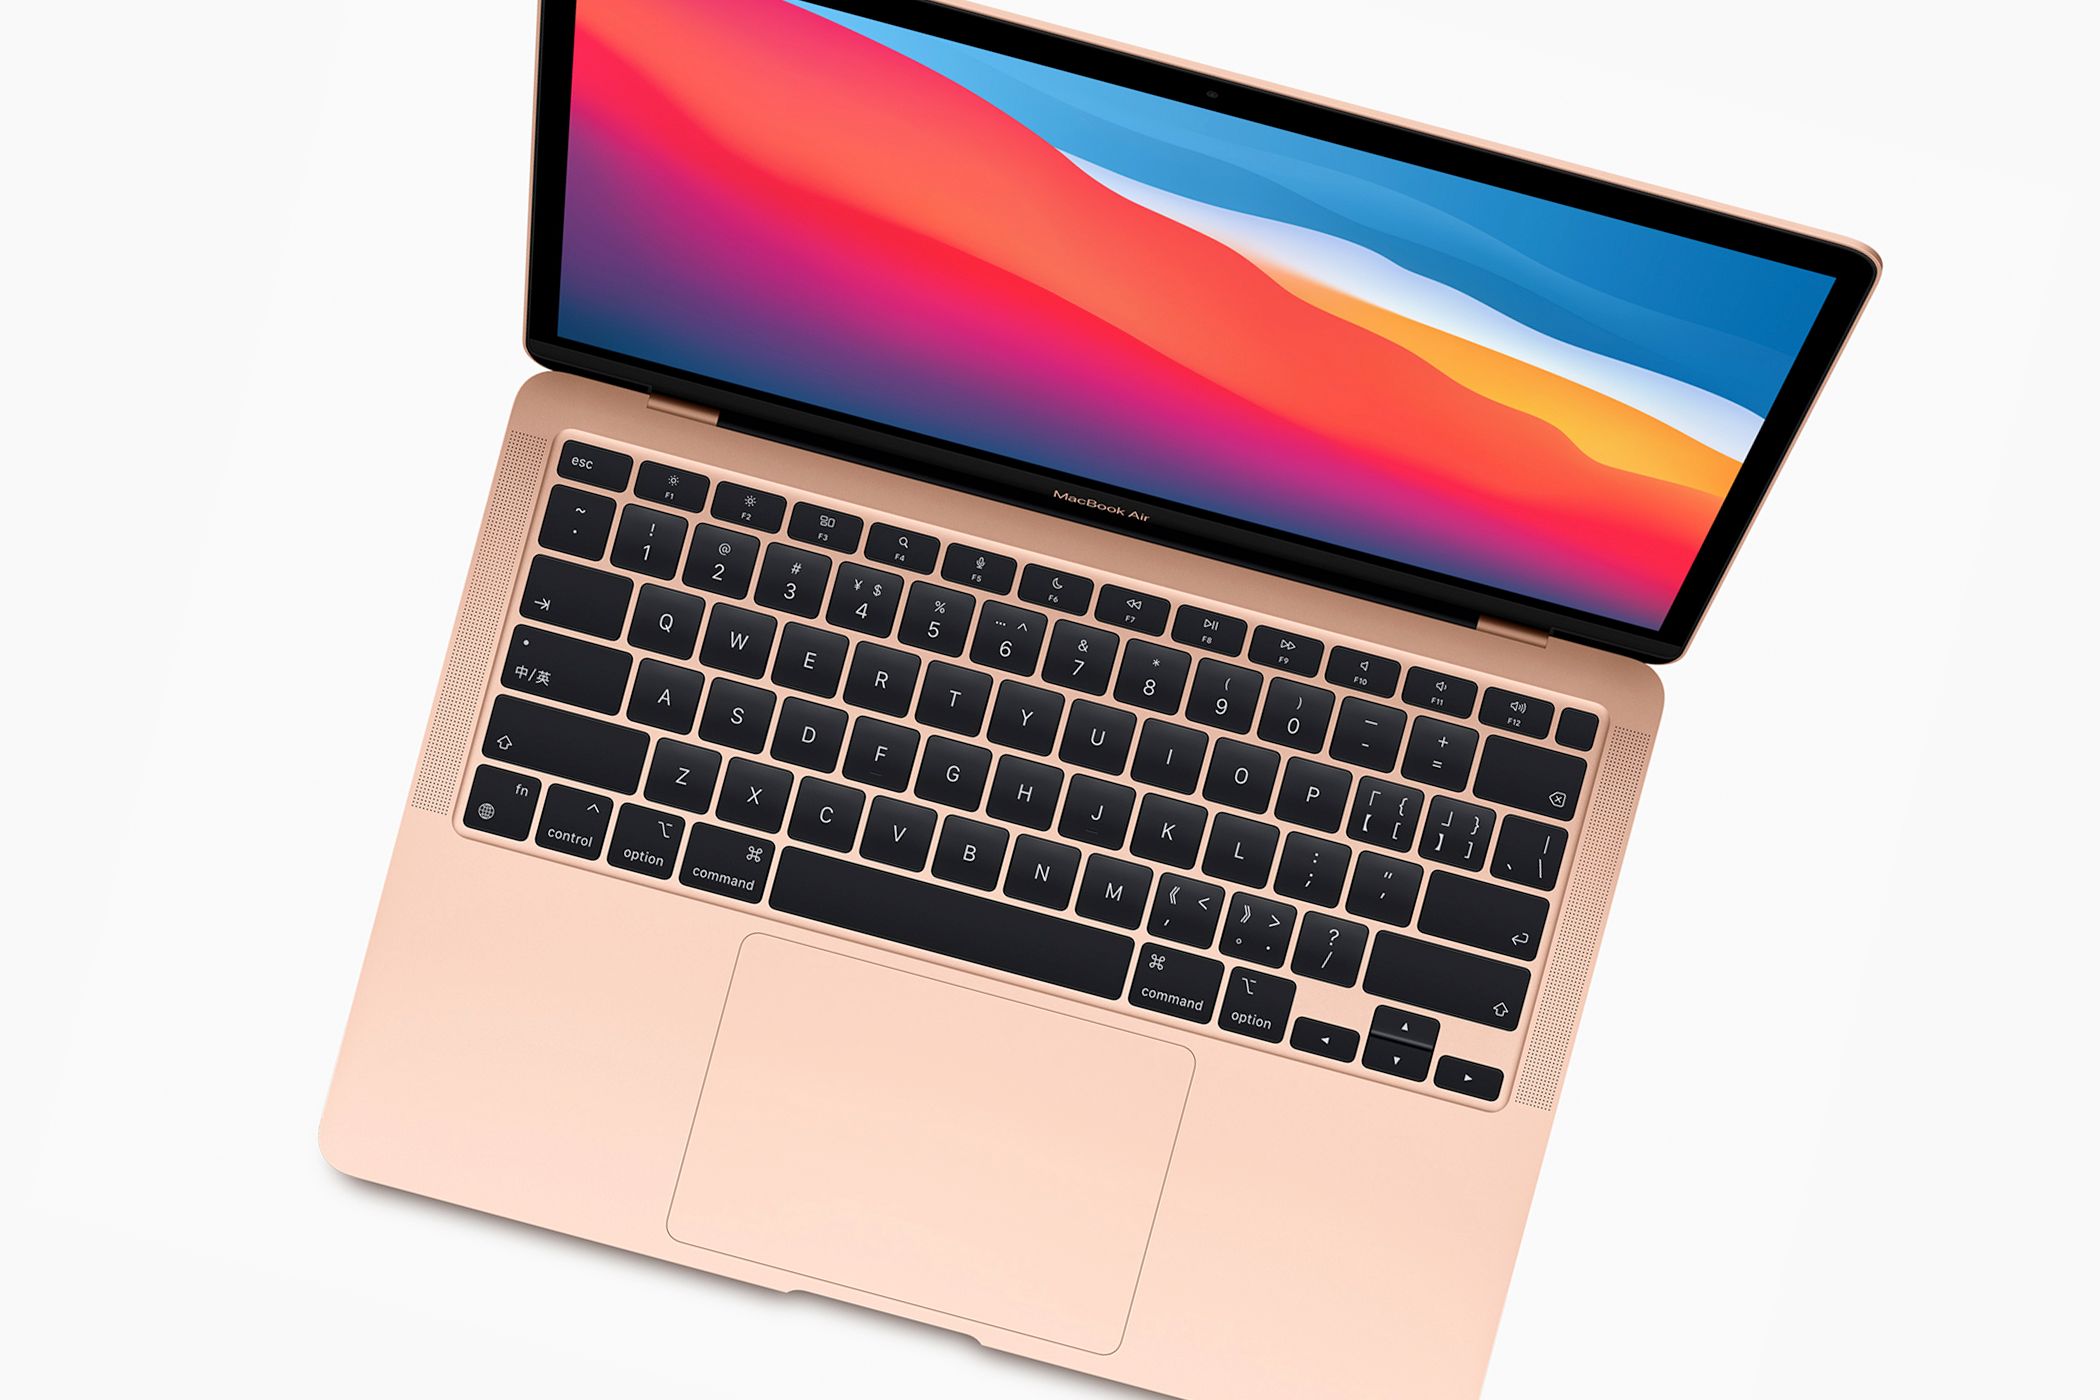 The M1 MacBook Air on a gray background.